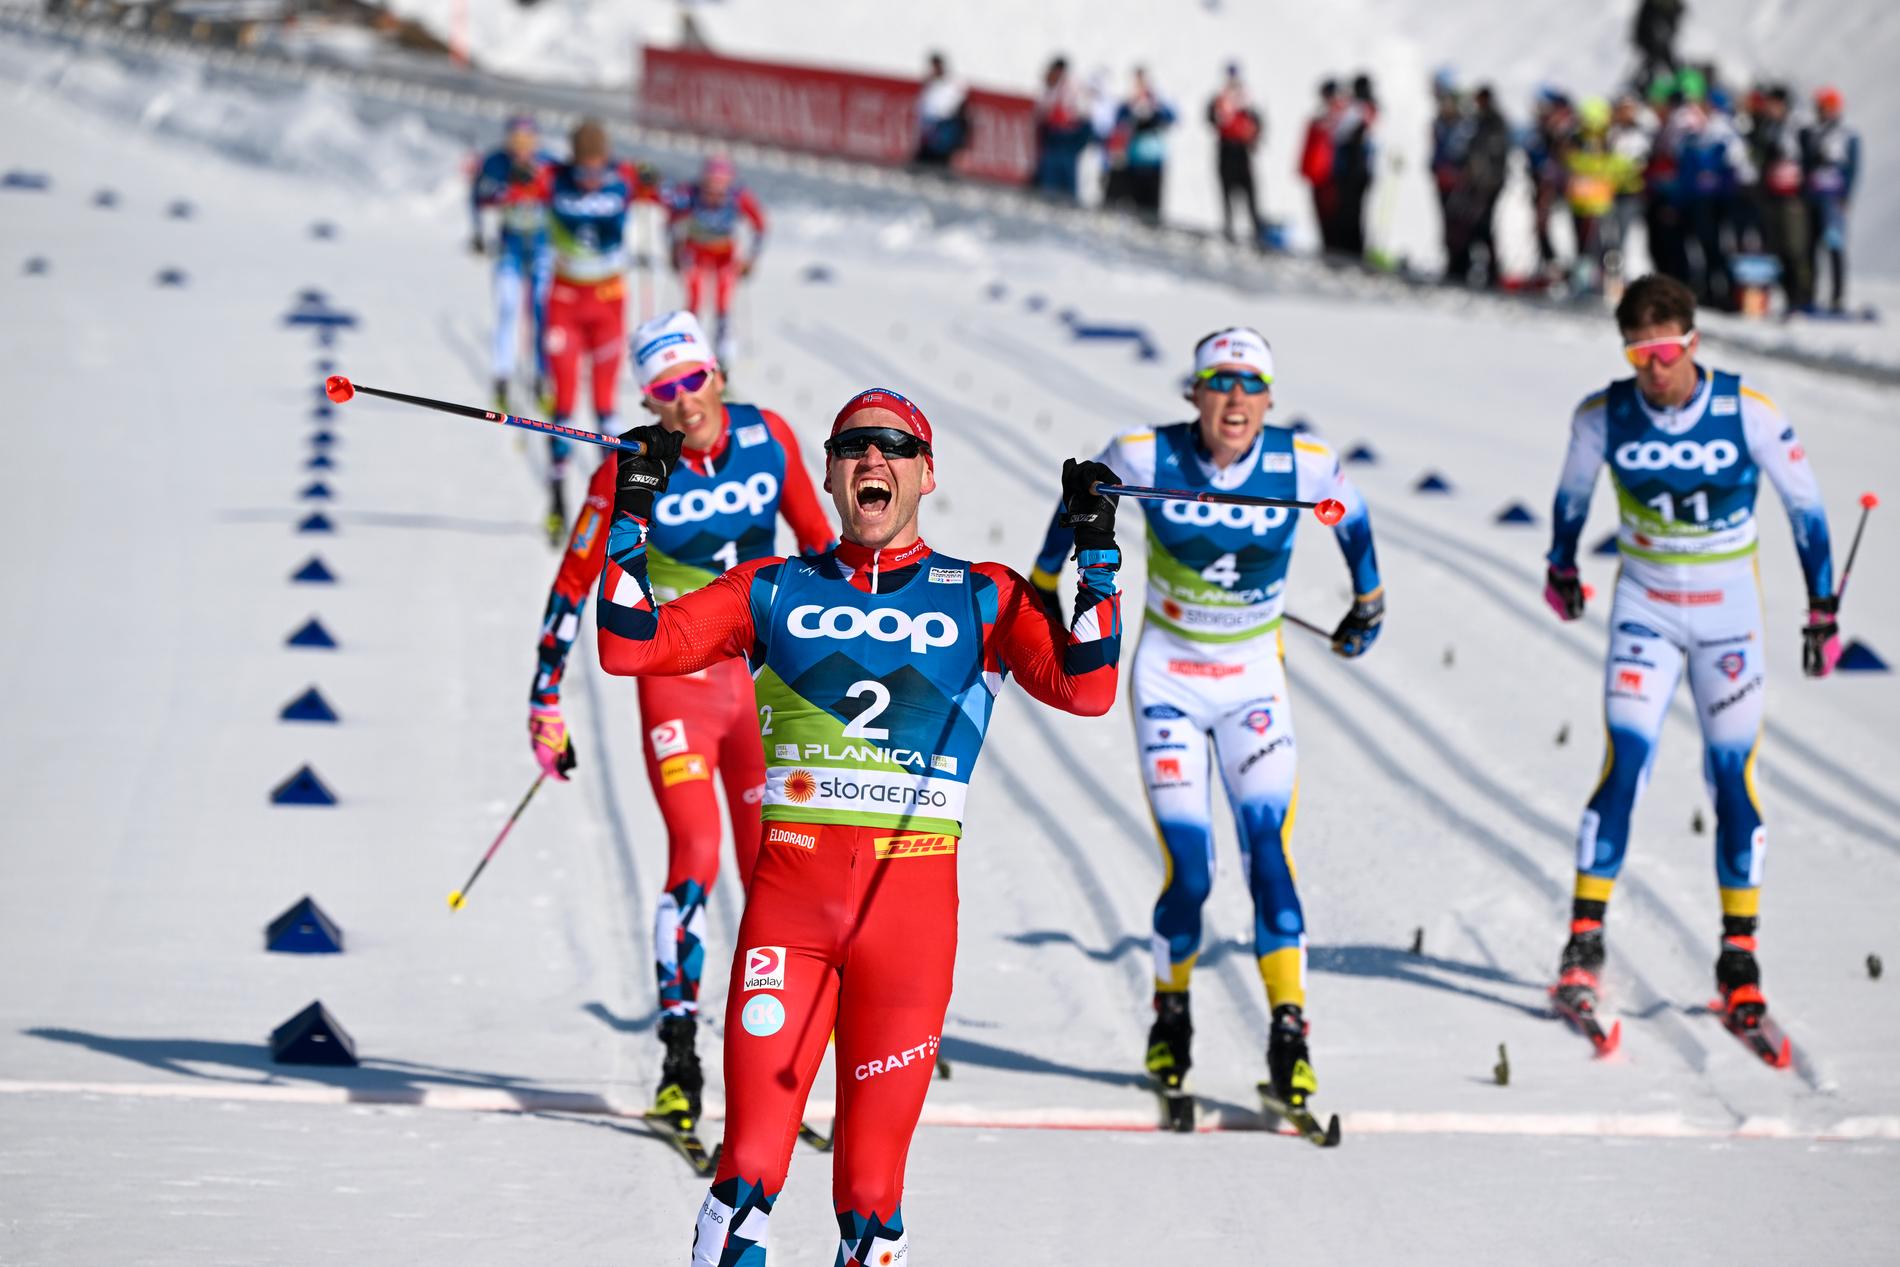 World champion: In the longest distance ever, Pål Golberg clicked the run, was the strongest, and won the 5,000 in Planica last season. 